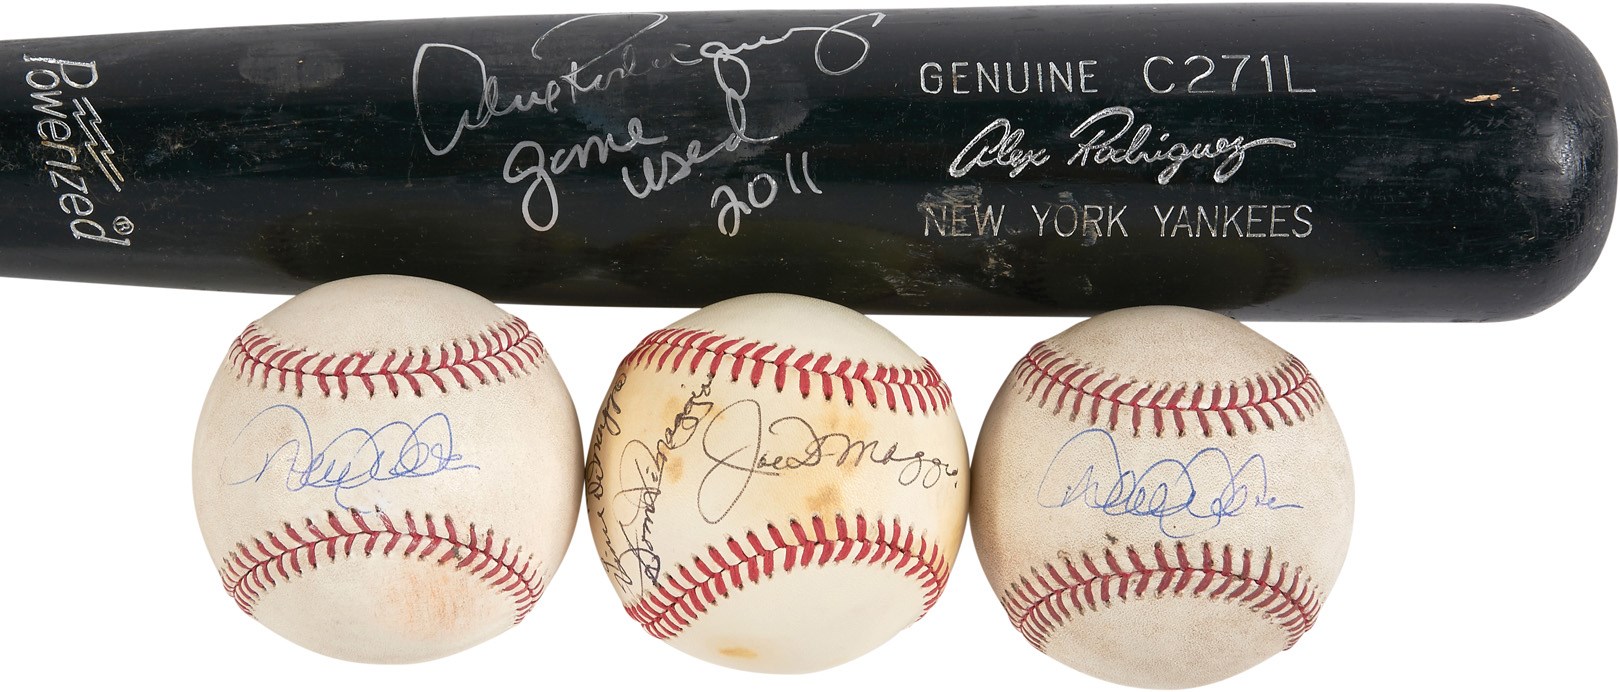 - Yankees & Dodgers Legends Signed Baseballs and Game Used Collection (11)